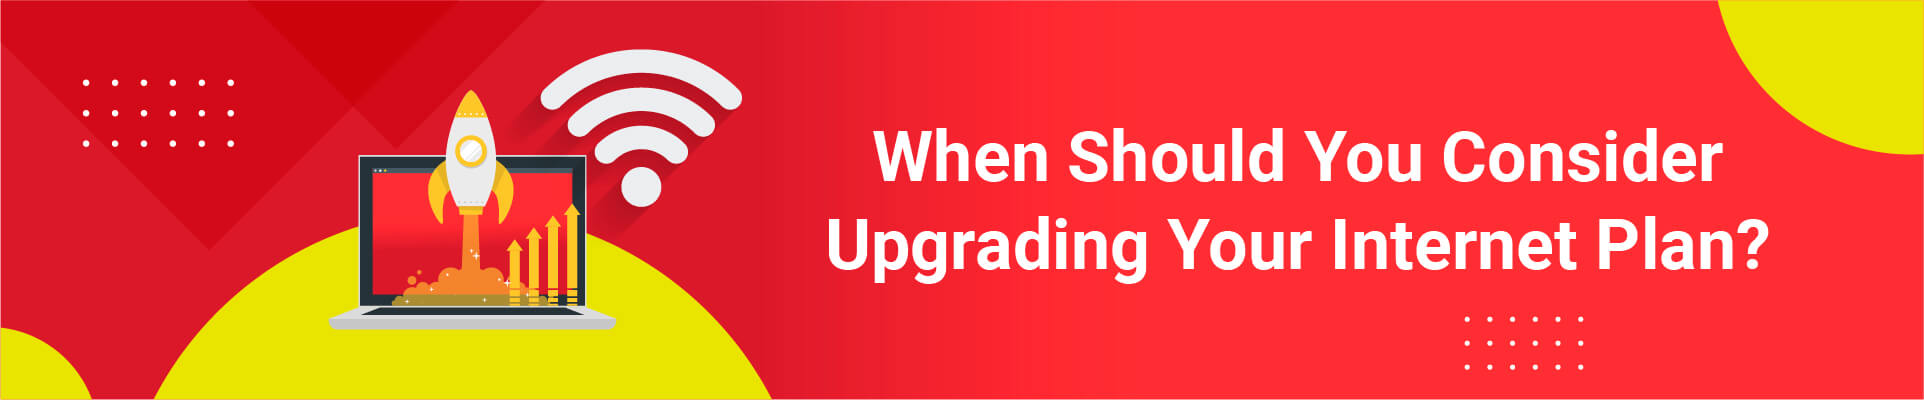 4 Signs You Should Upgrade Your Internet Plan